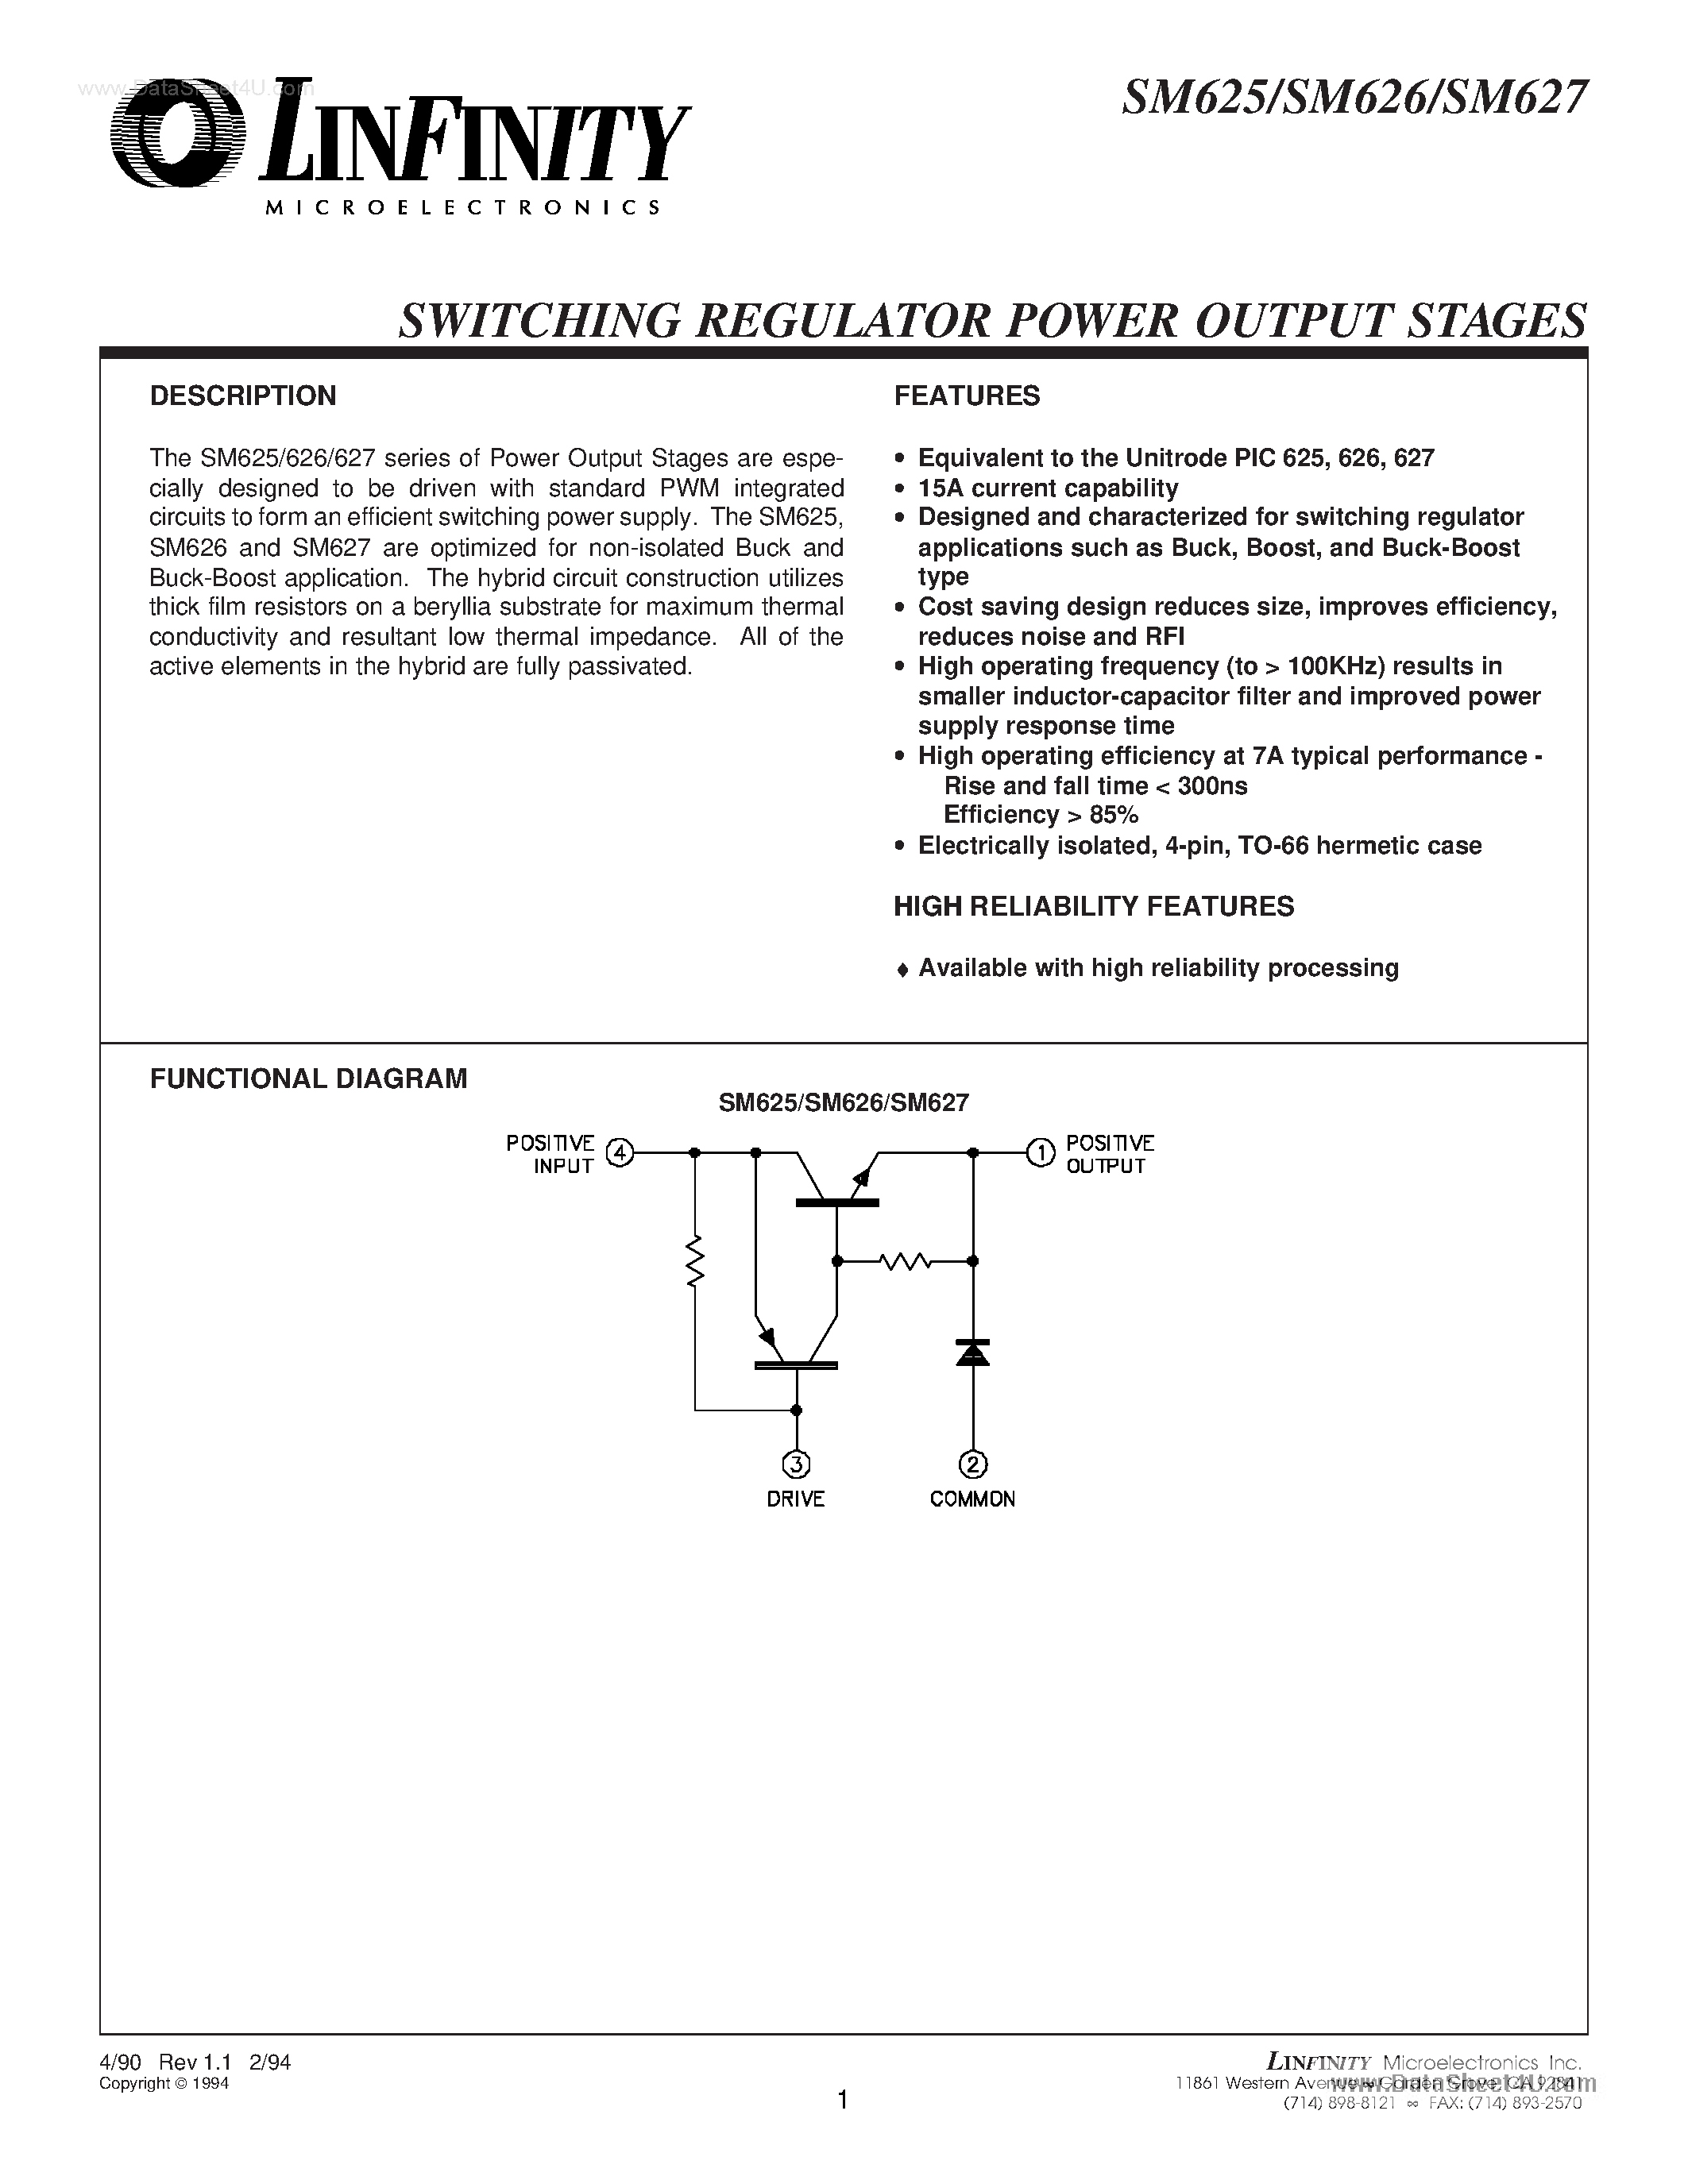 Даташит SM626 - (SM62x) SWITCHING REGULATOR POWER OUTPUT STAGES страница 1